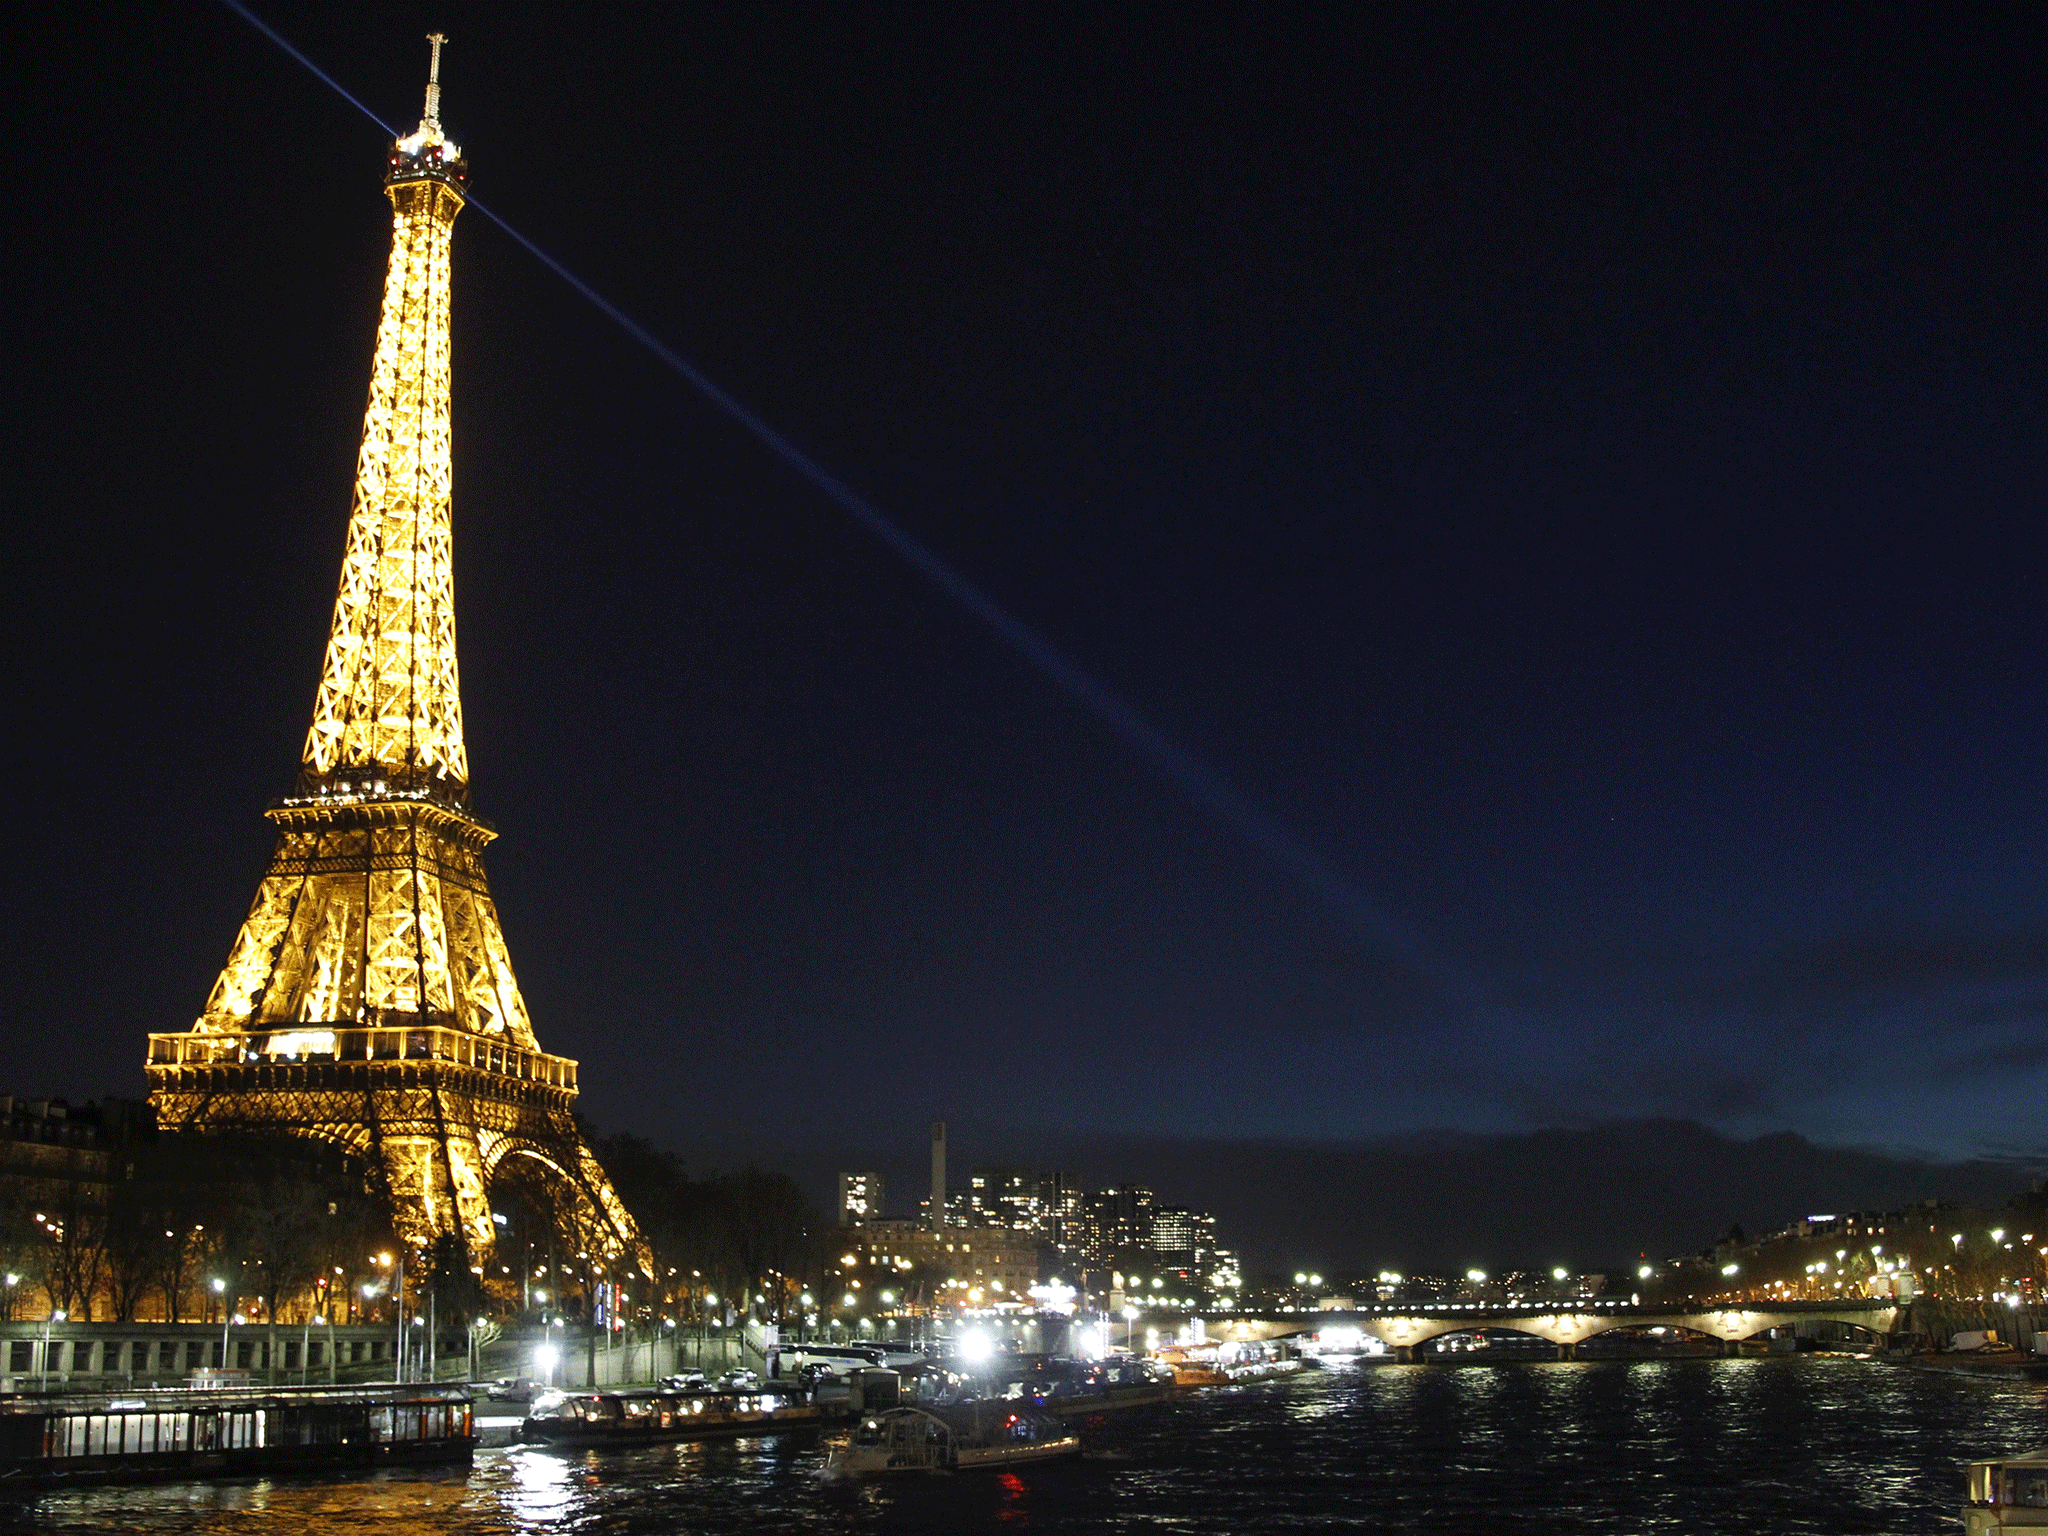 The Eiffel Tower's lights will be switched off early